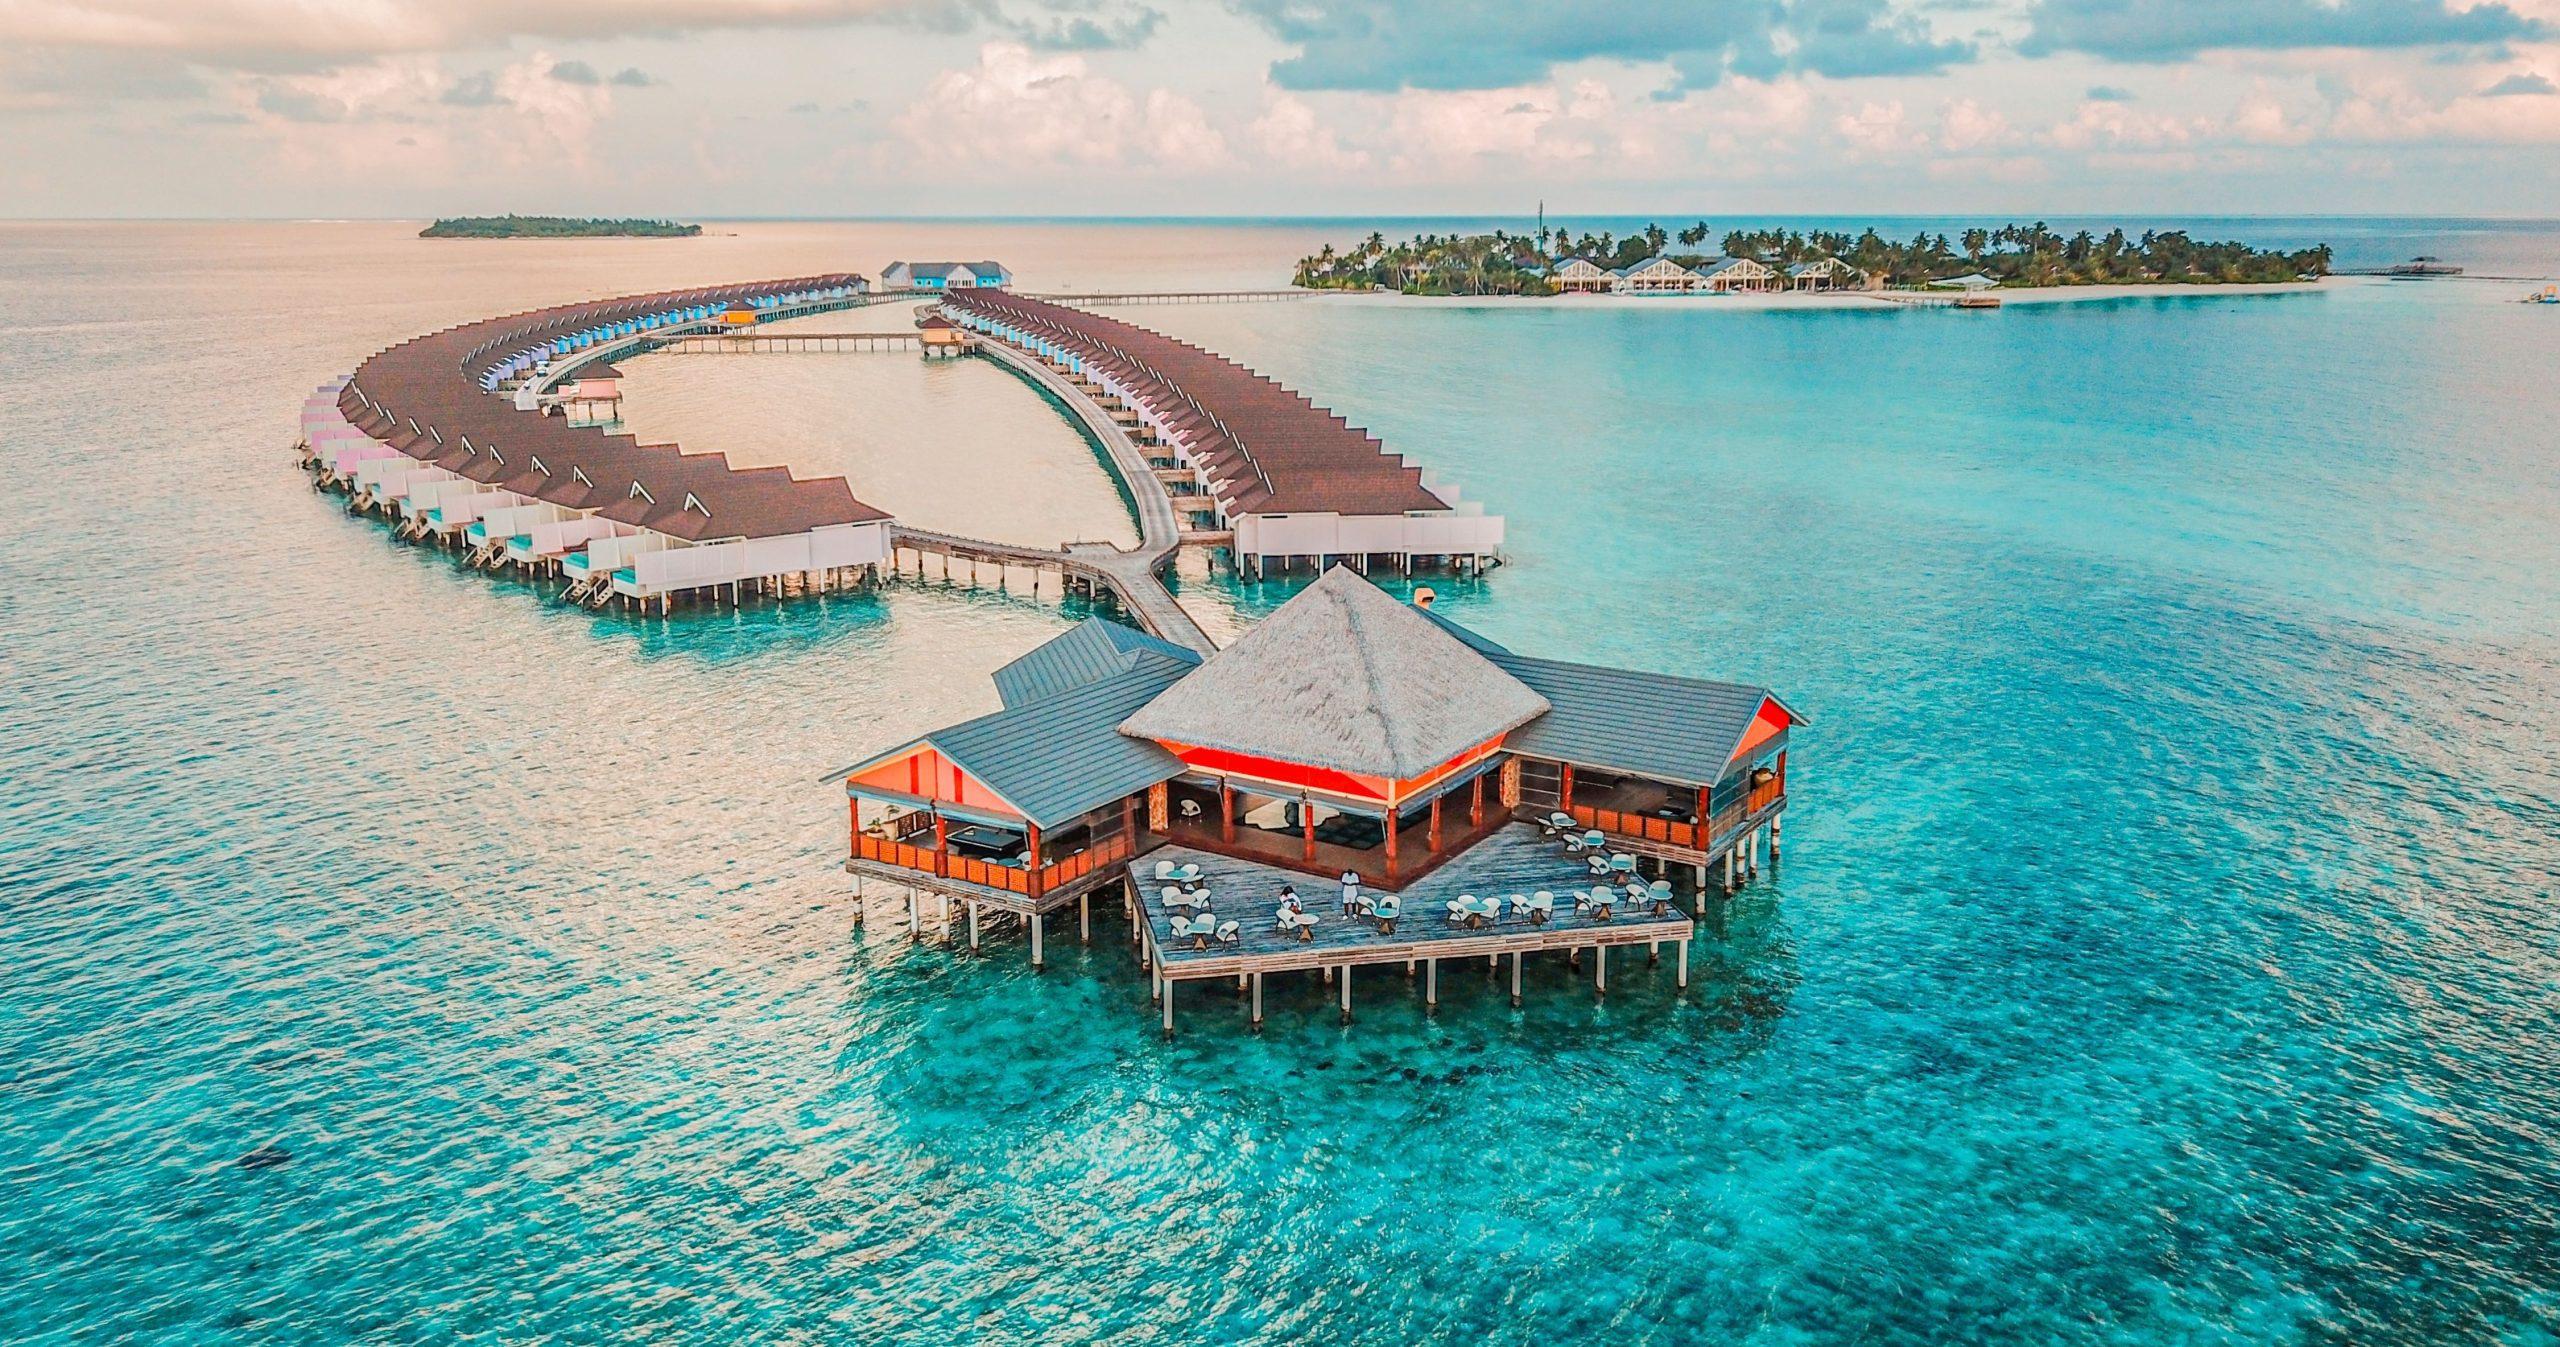 Aerial of a resort on the water in the Maldives.